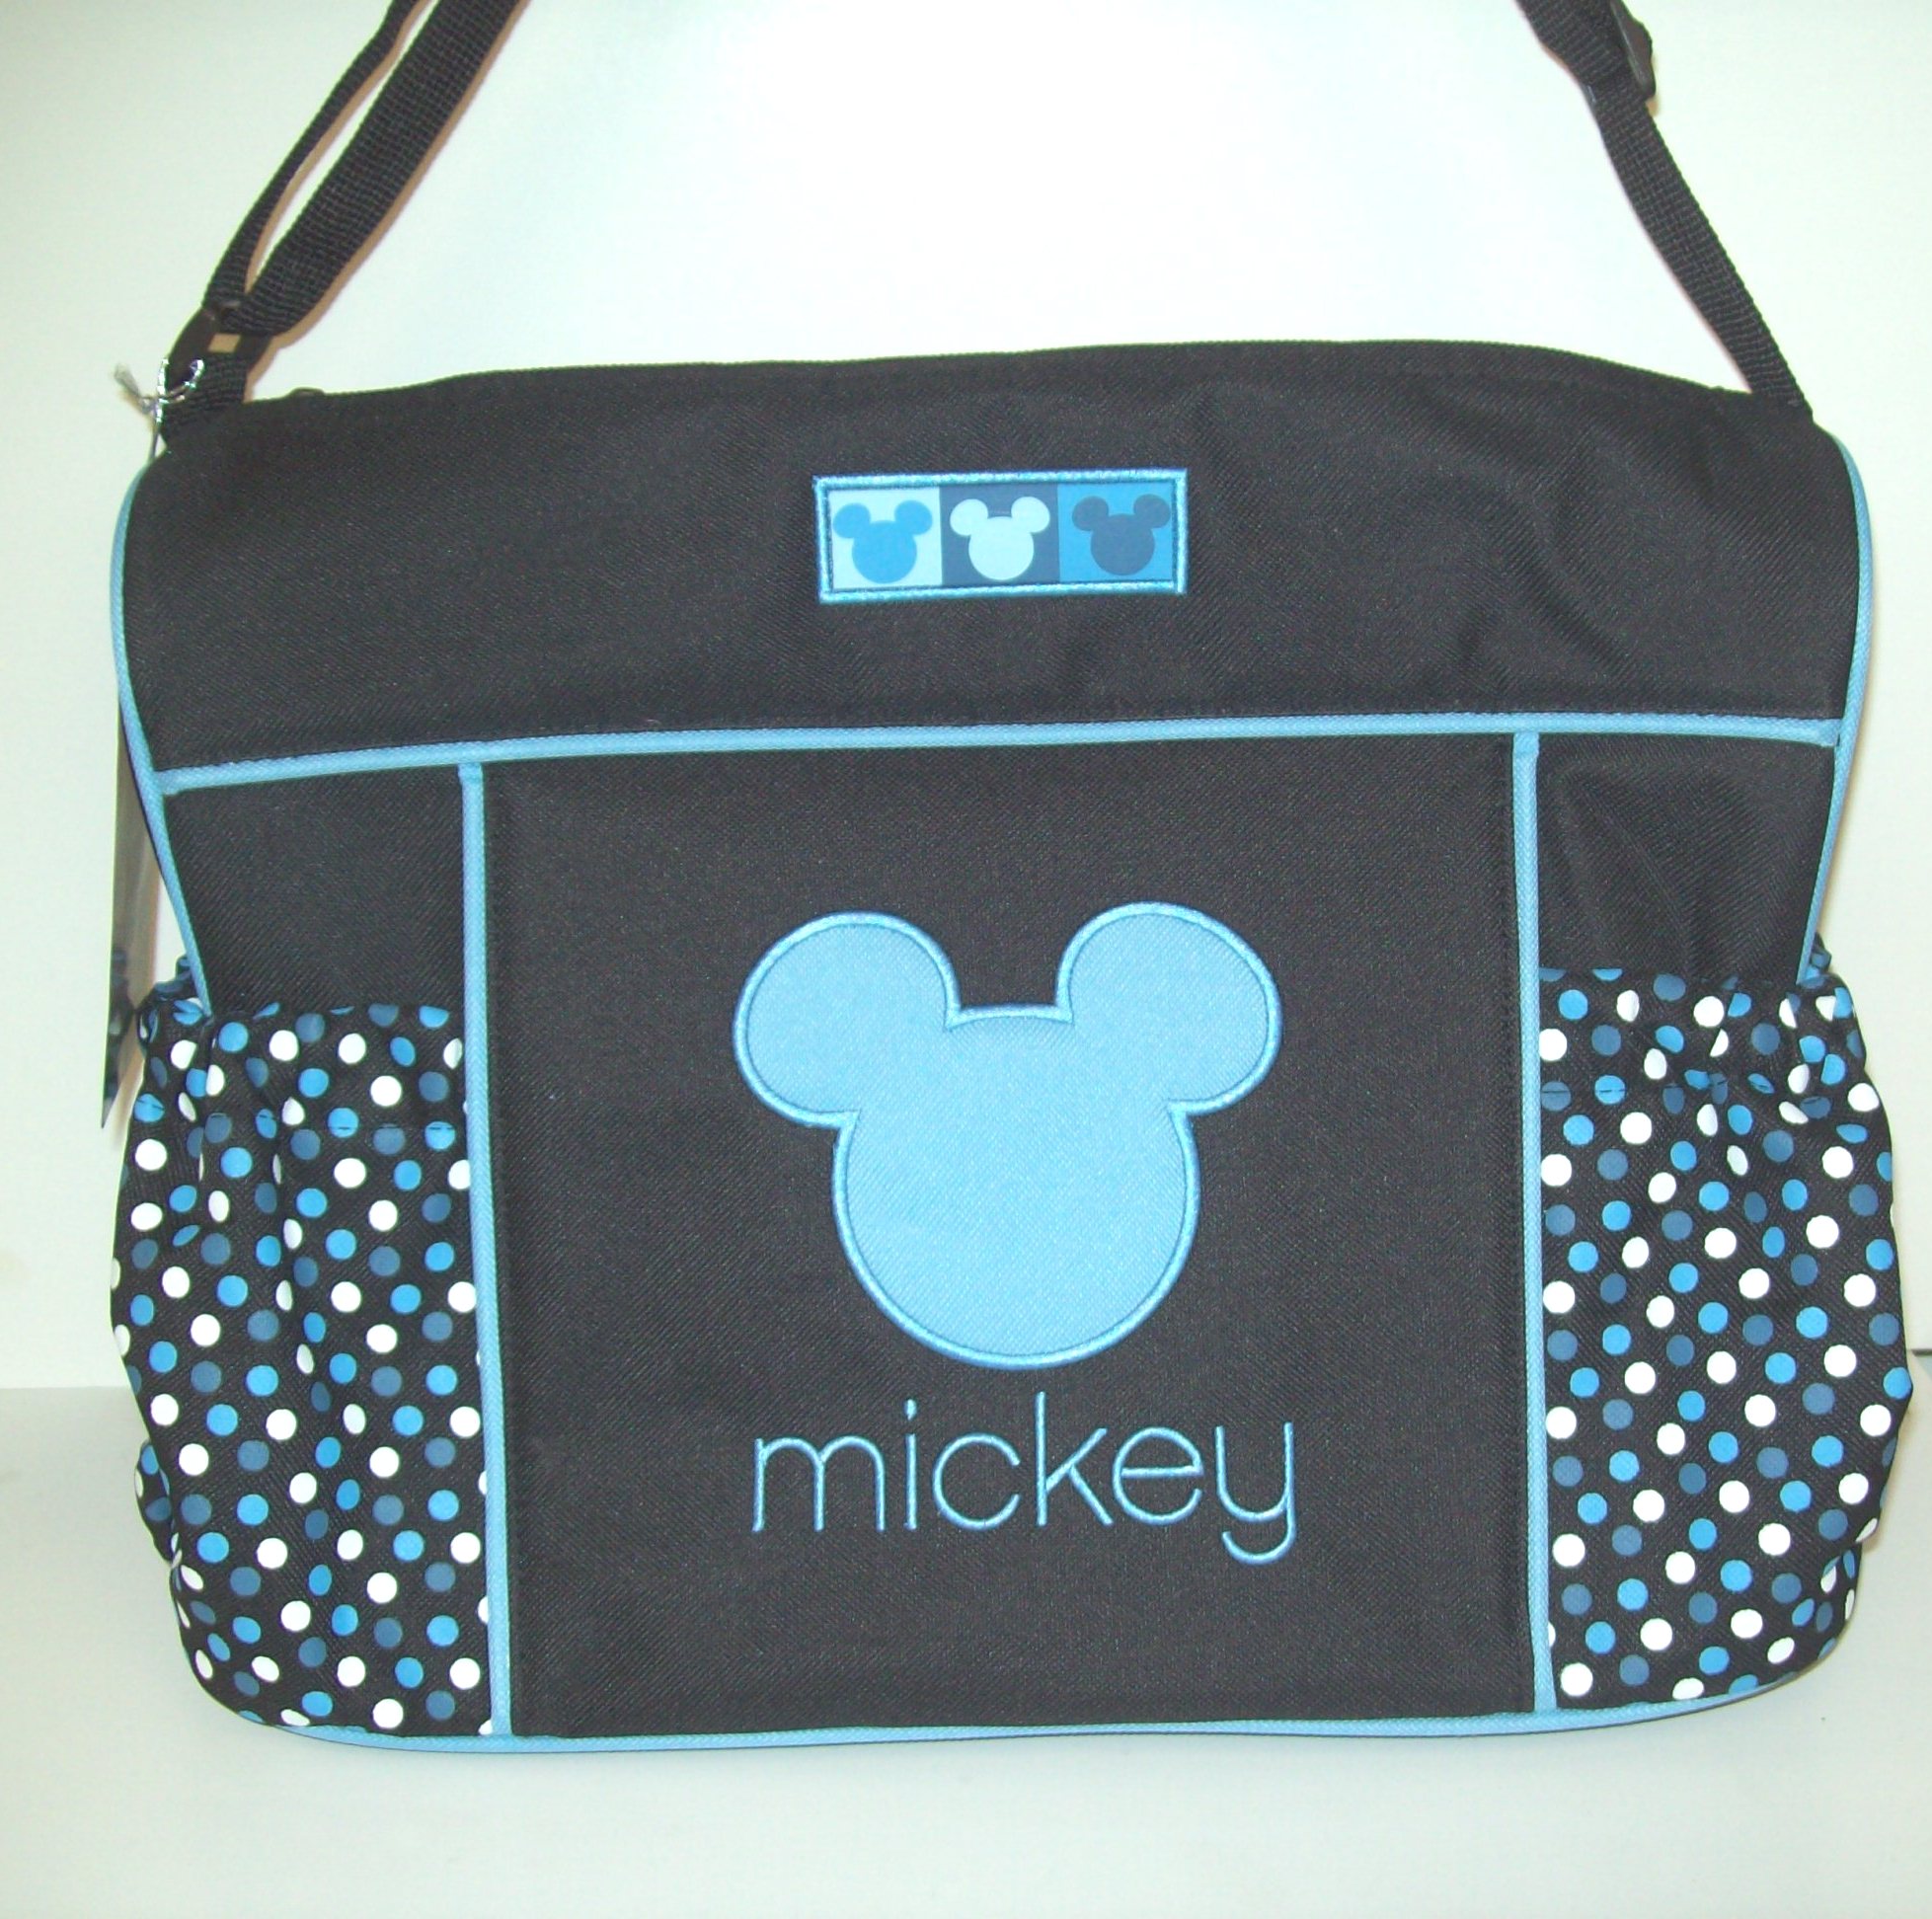 Disney Mickey Mouse Diaper Bag | Shop Your Way: Online Shopping & Earn Points on Tools ...